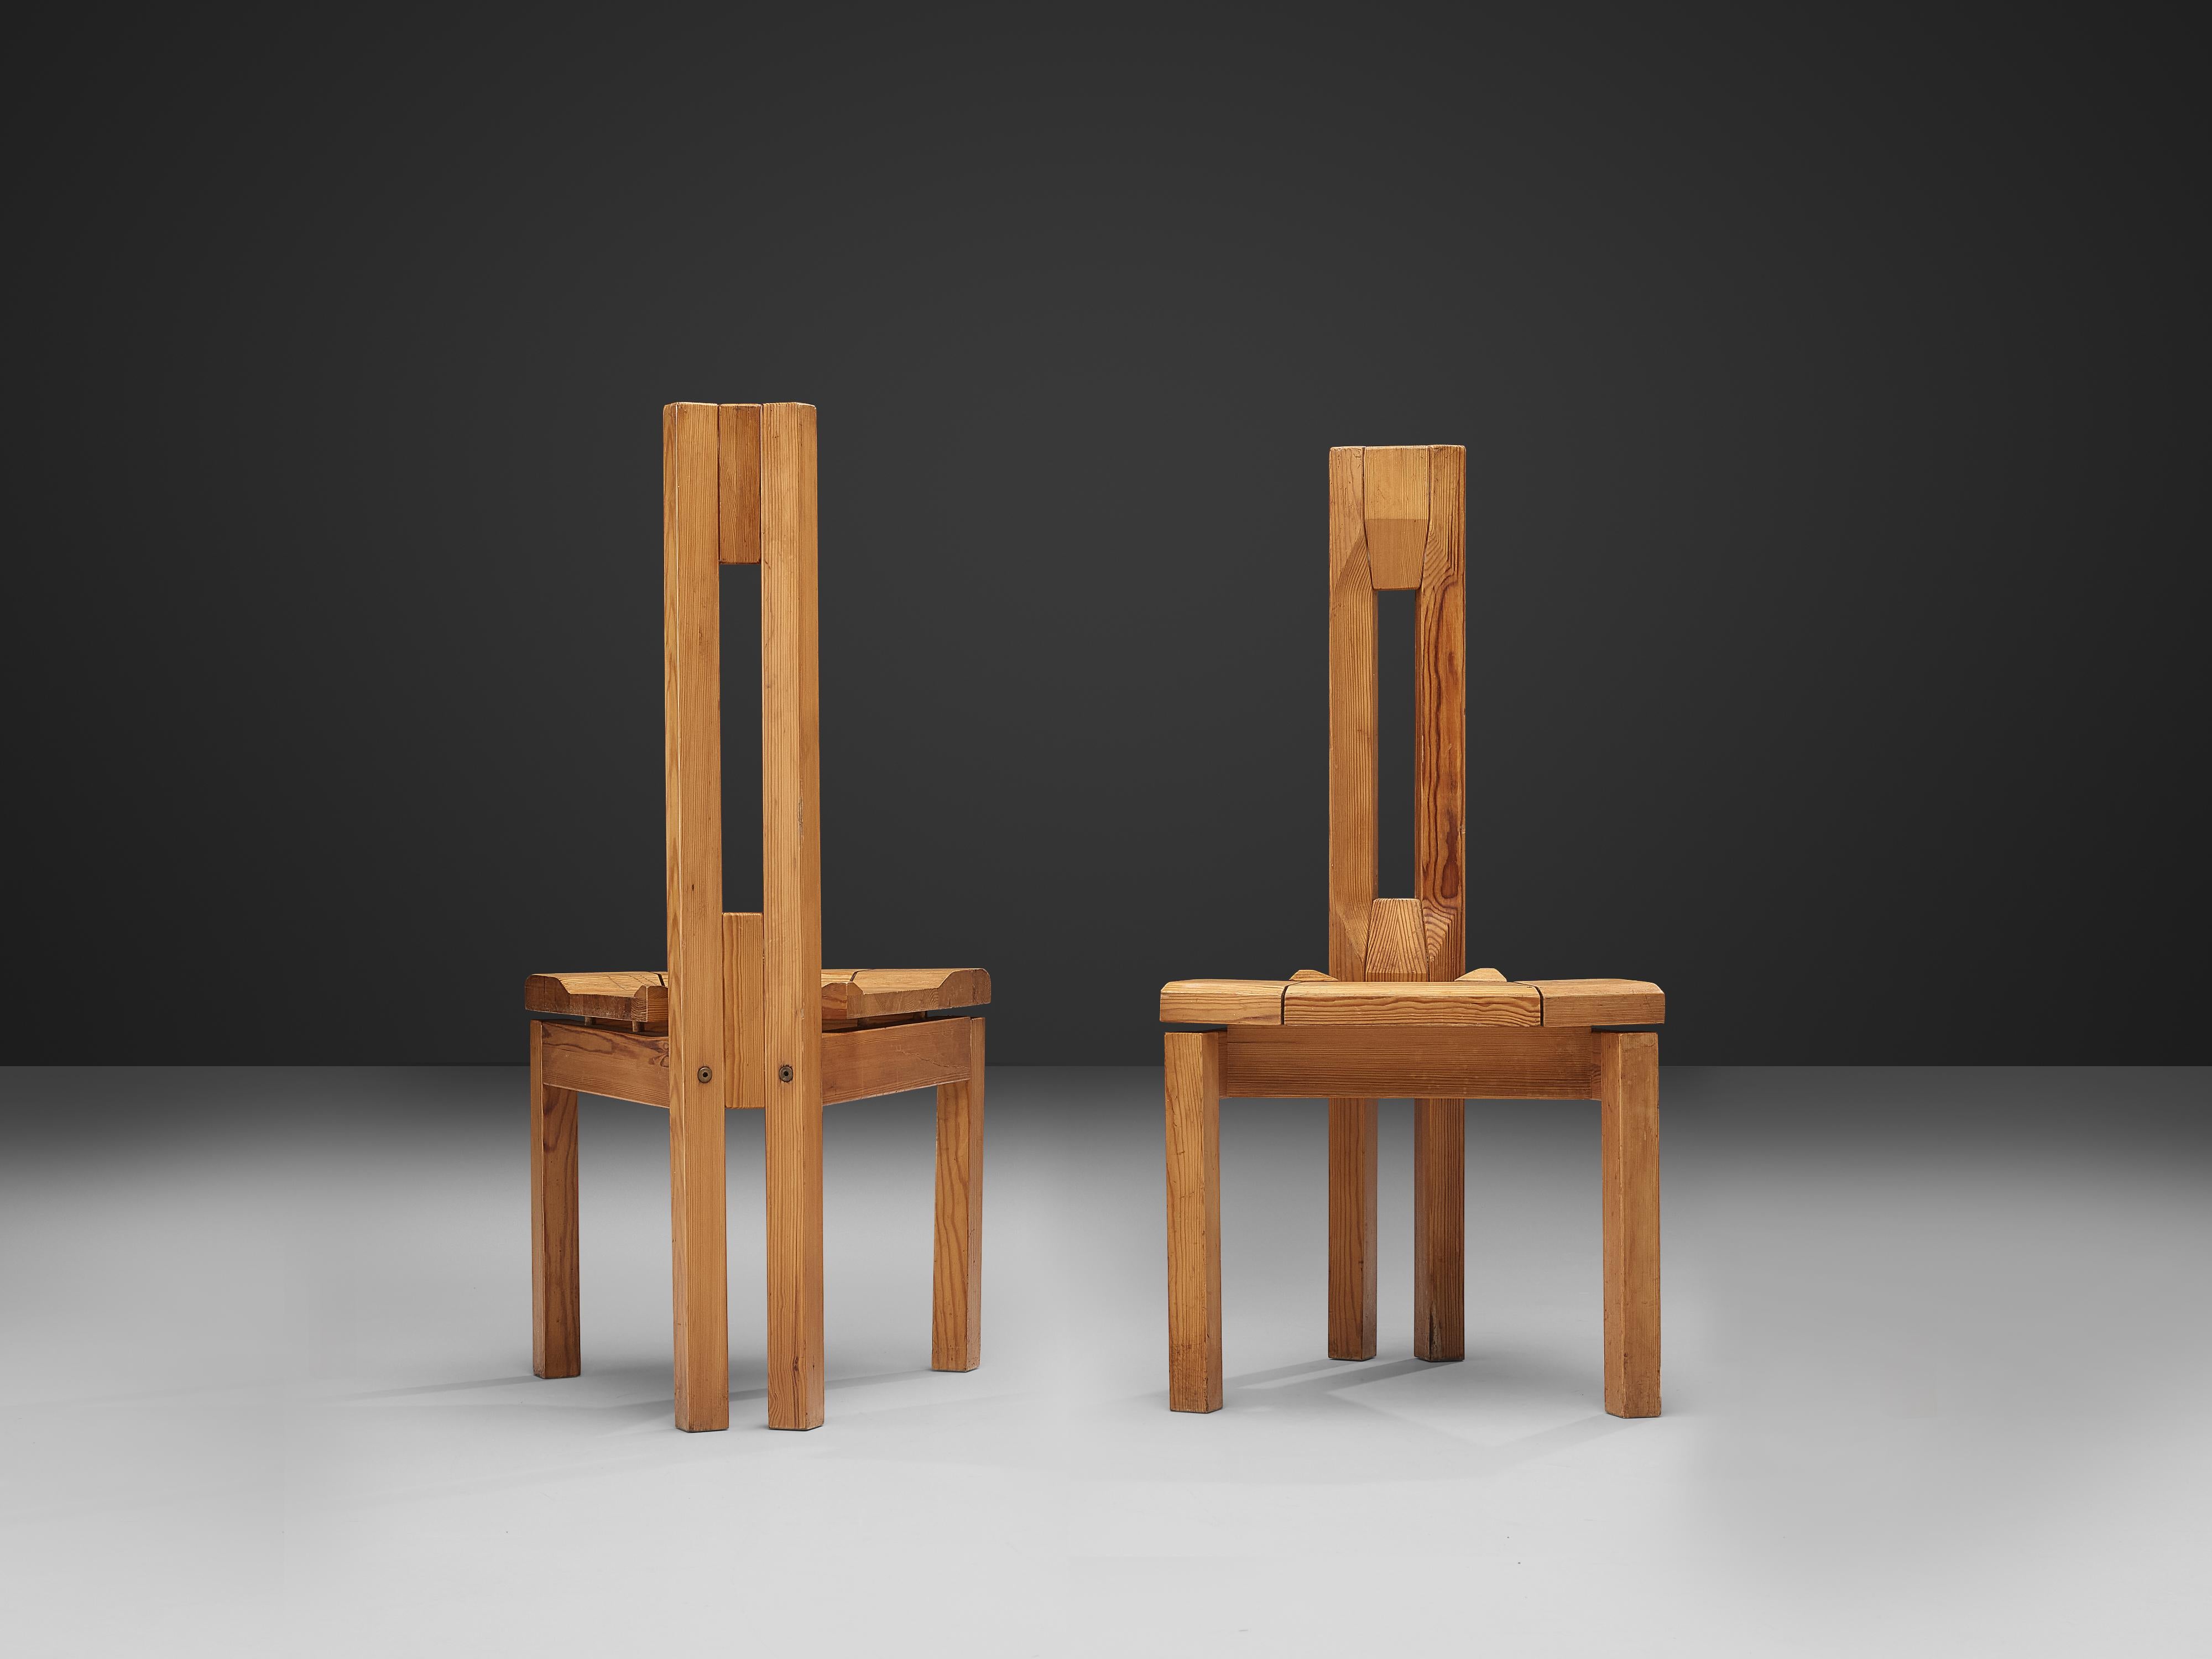 Laukaan Puu, side chairs, pine, Finland, 1950s

Exquisite set of two side chairs by Finish manufacturer Laukaan Puu. With their high and slim backrest and their trapezoid seat this set can be arranged together to great one item or placed apart as